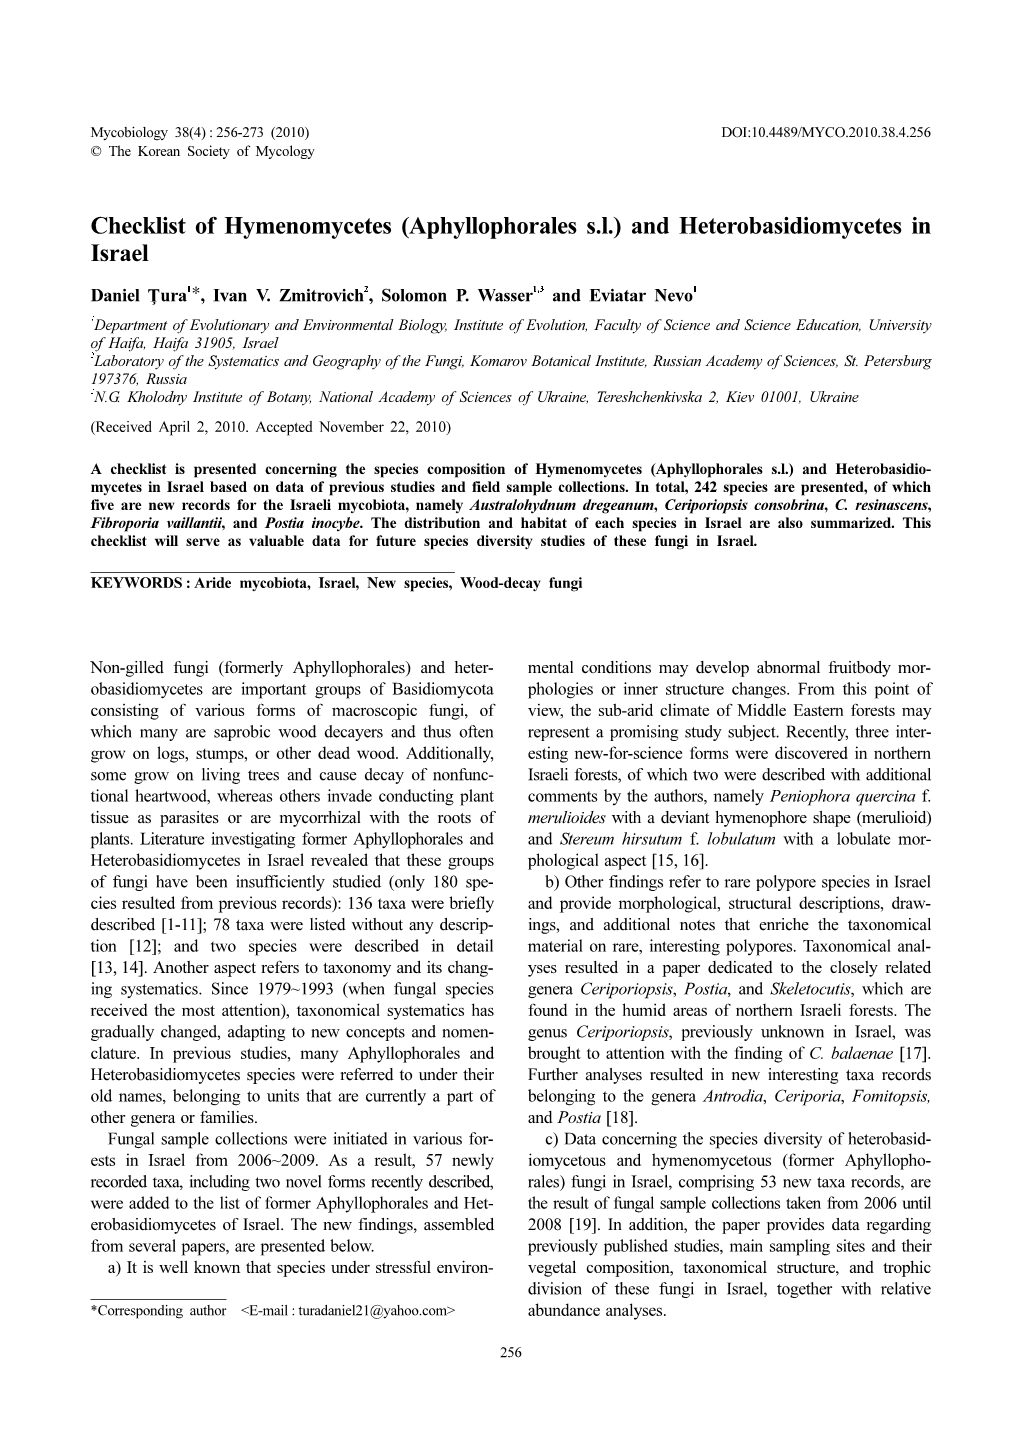 Checklist of Hymenomycetes (Aphyllophorales S.L.) and Heterobasidiomycetes in Israel